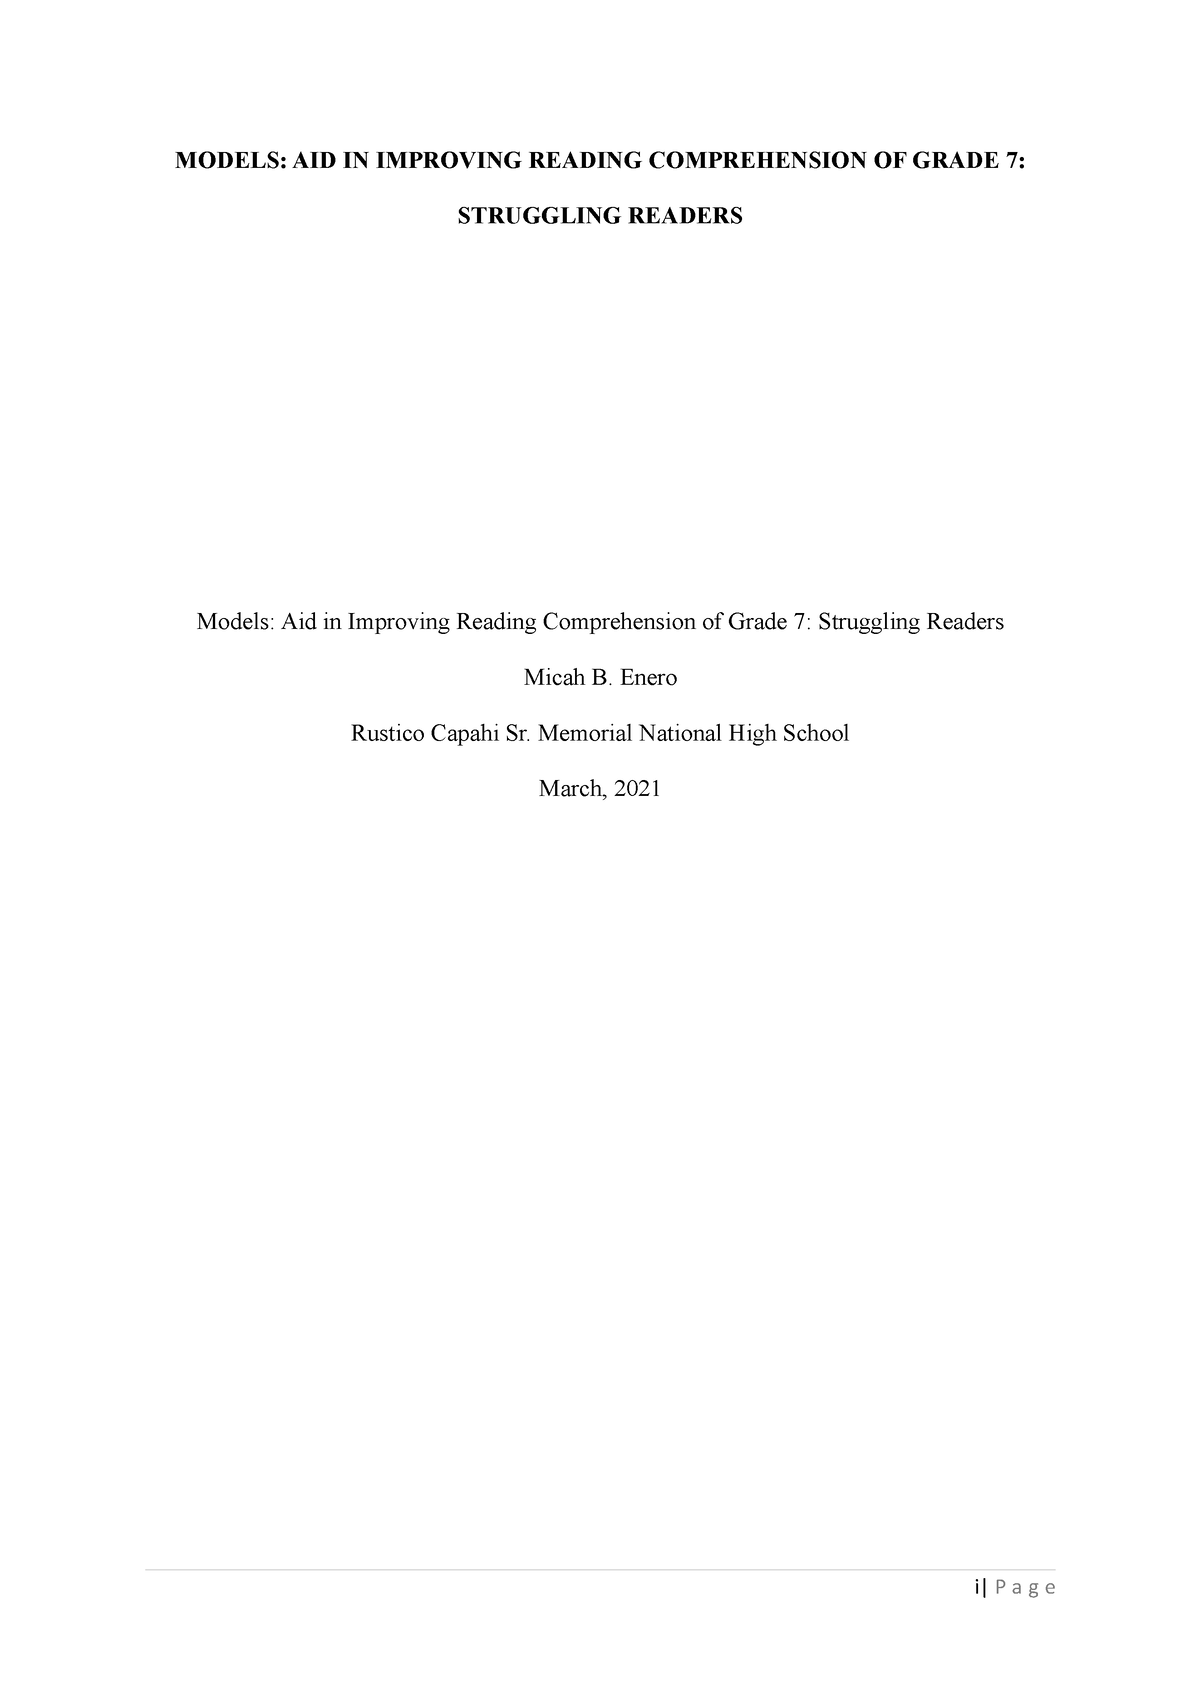 research proposal on reading difficulties pdf philippines